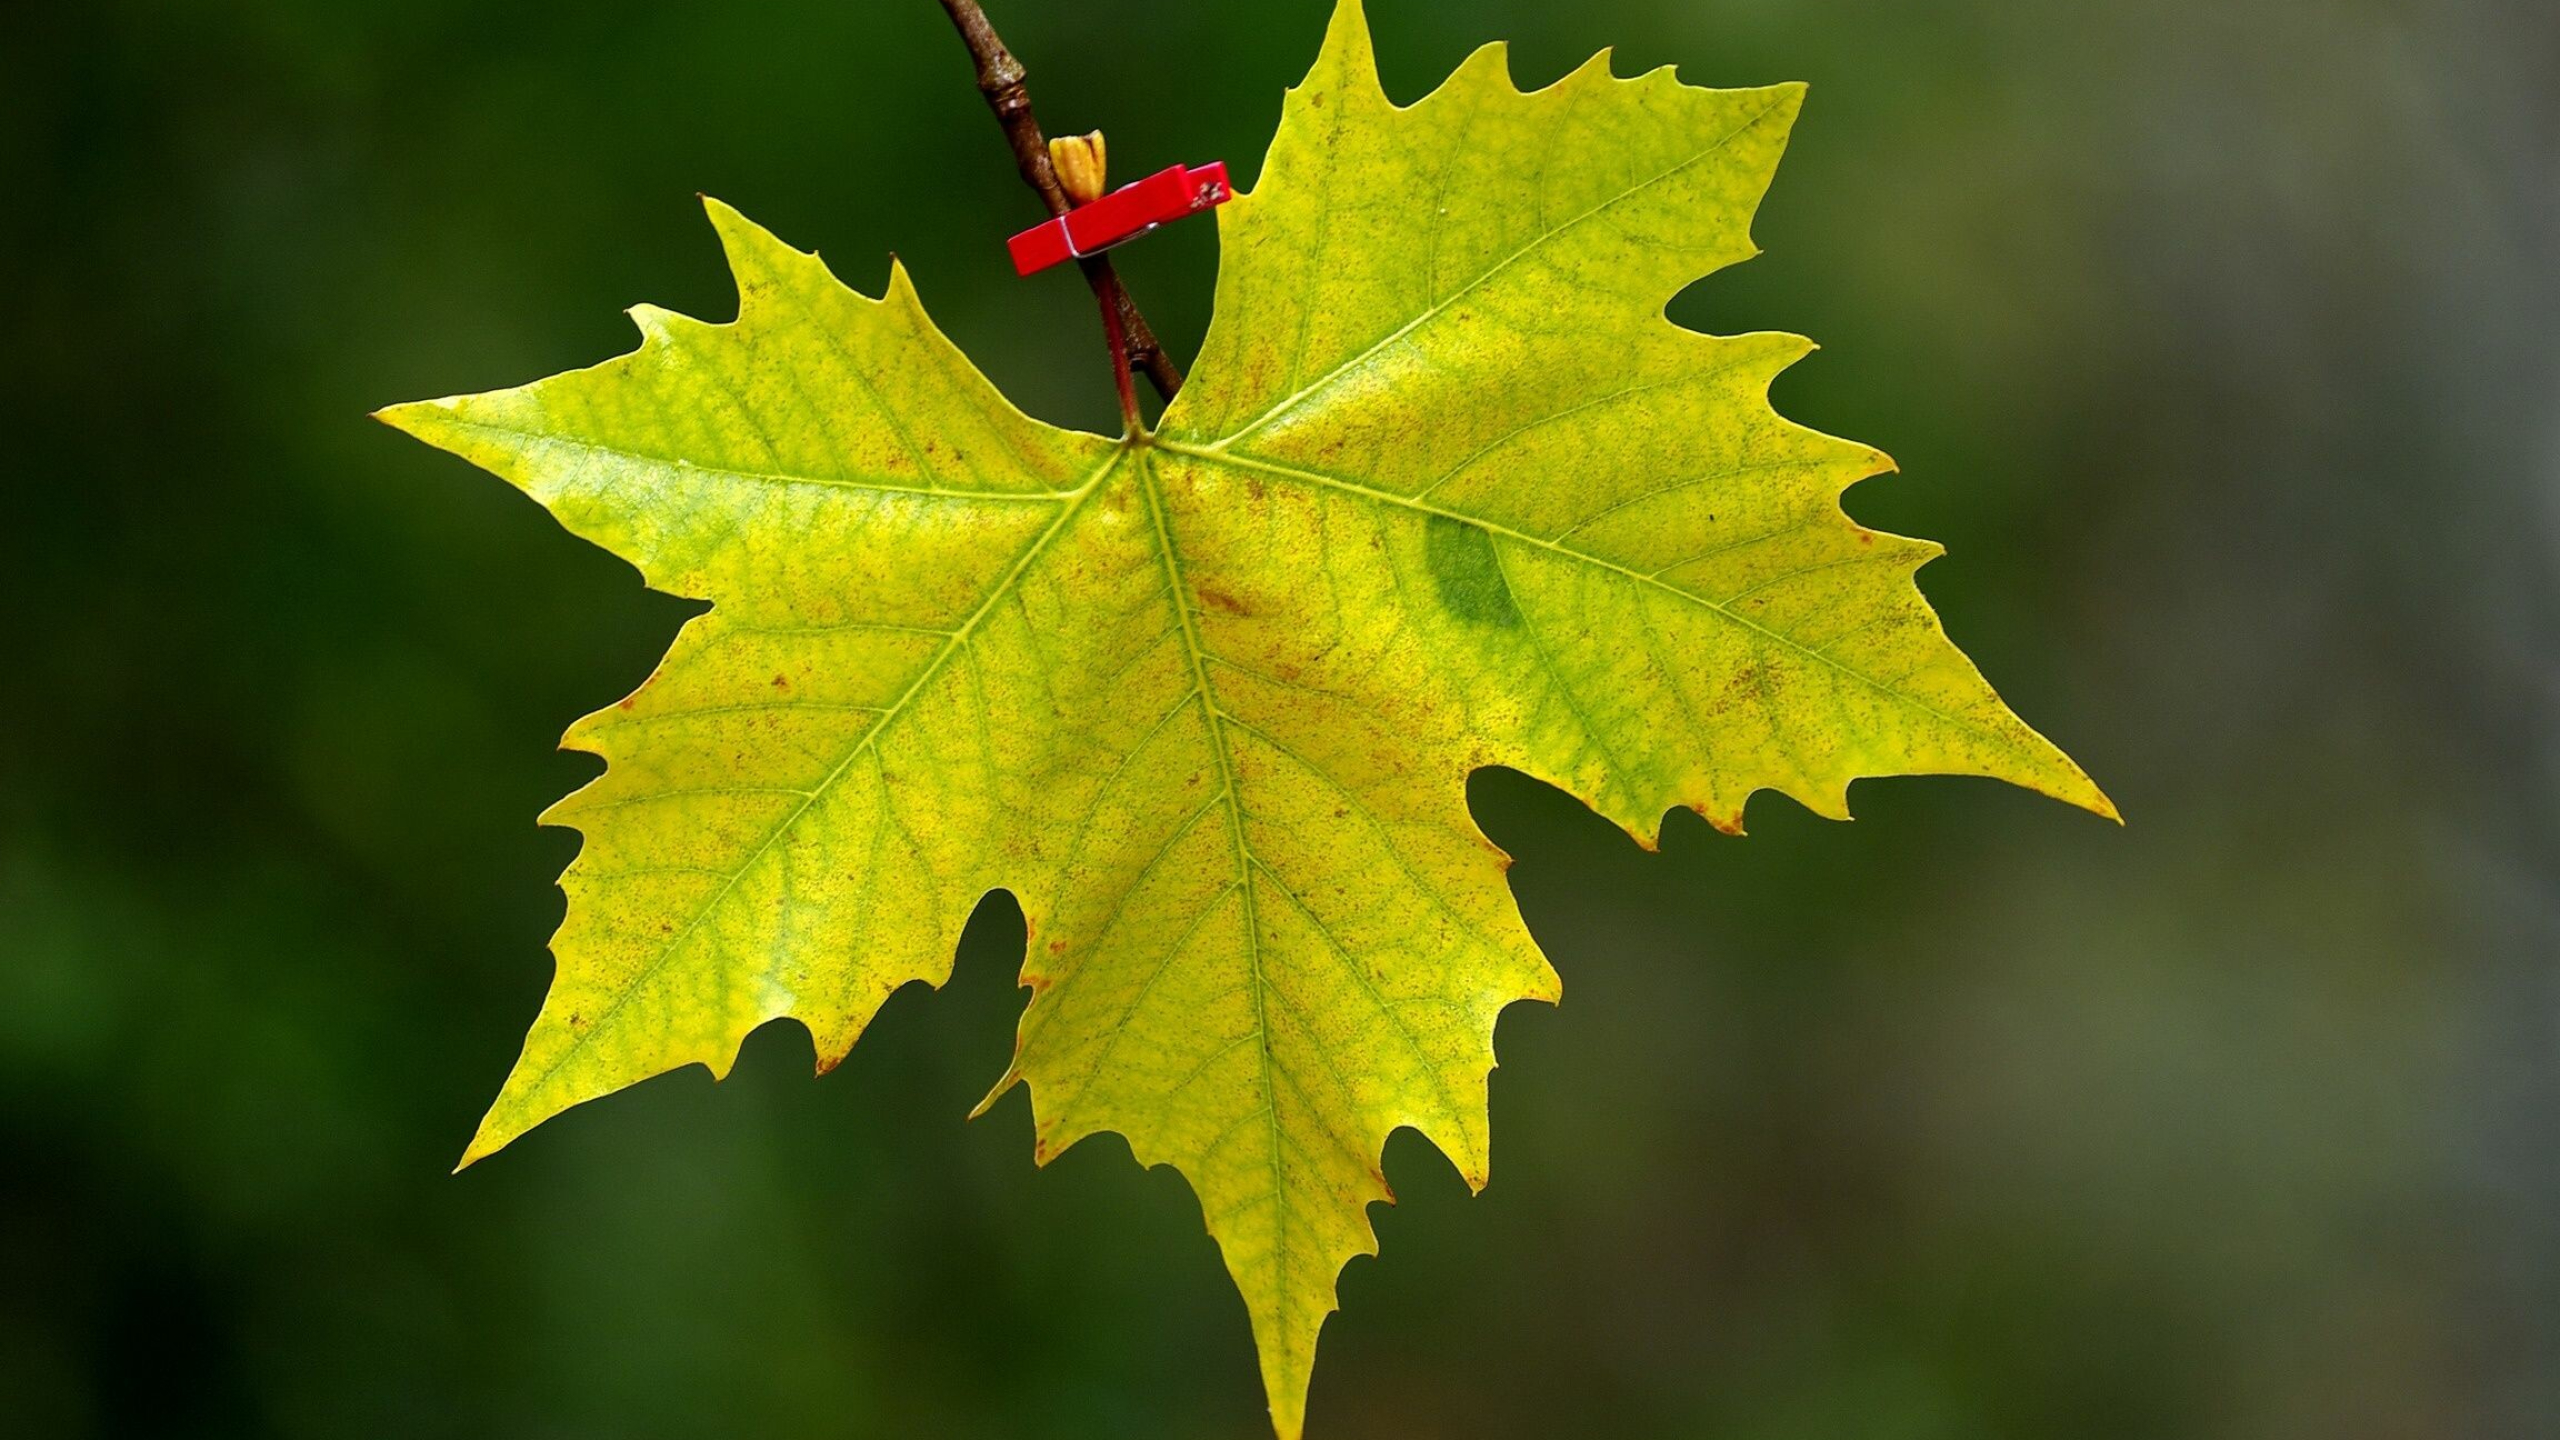 Leaf: Maple, Usually borne above ground and specialized for photosynthesis. 2560x1440 HD Wallpaper.